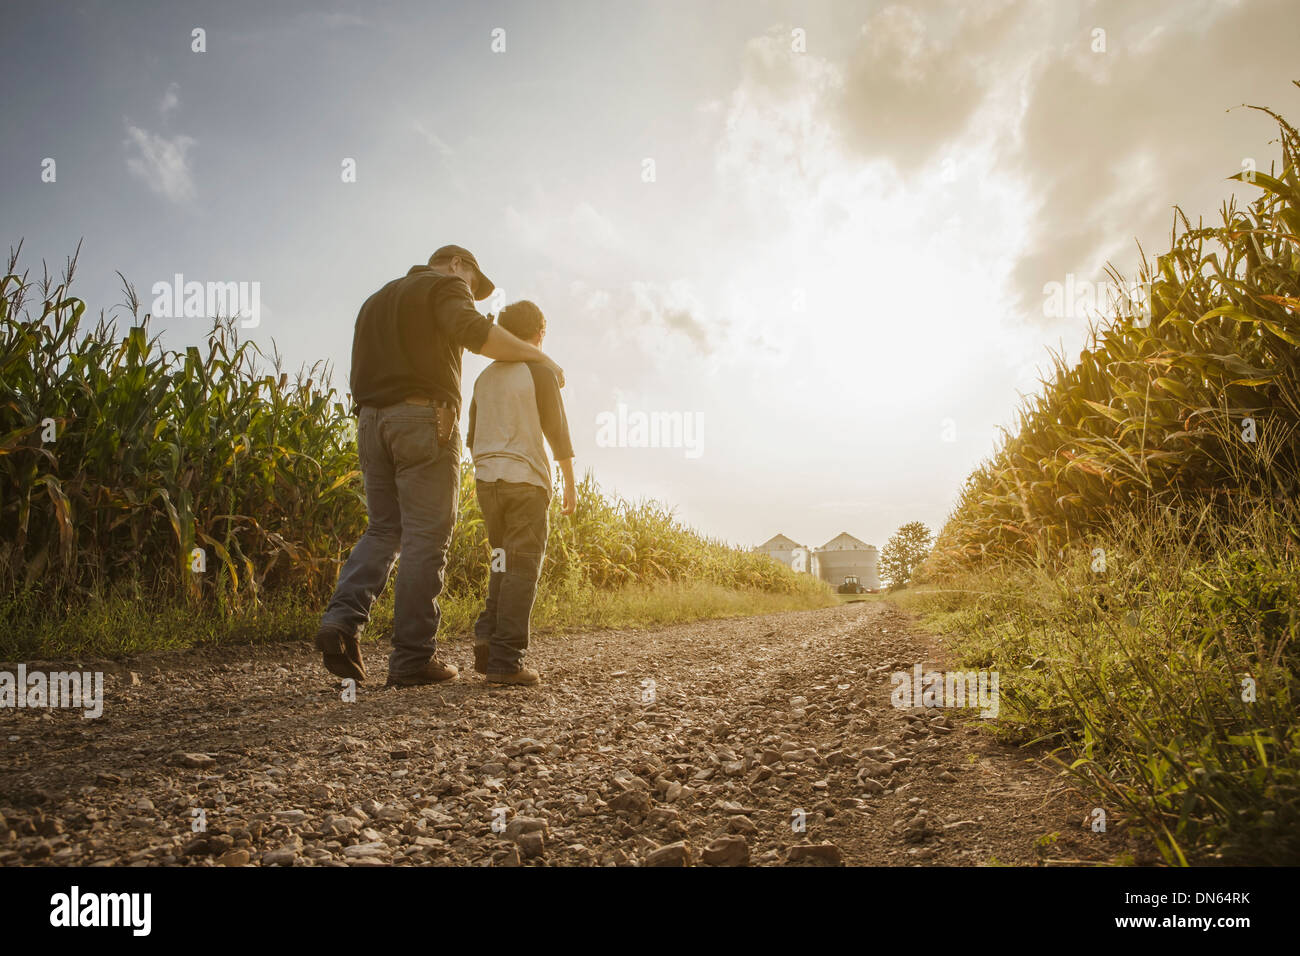 Caucasian father and son walking on dirt road through farm Stock Photo